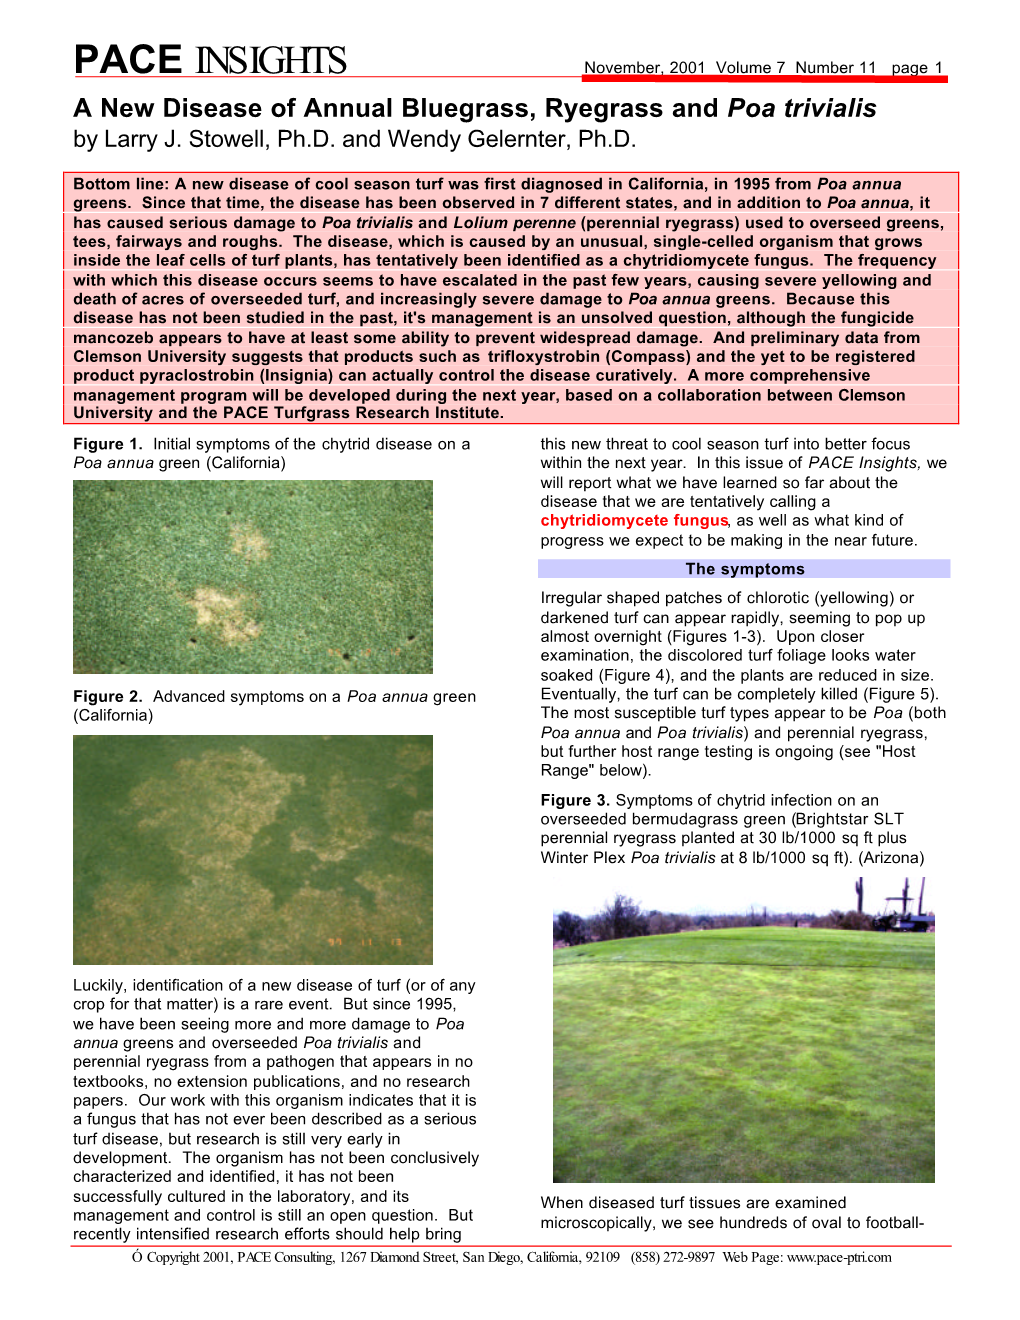 PACE INSIGHTS November, 2001 Volume 7 Number 11 Page 1 a New Disease of Annual Bluegrass, Ryegrass and Poa Trivialis by Larry J